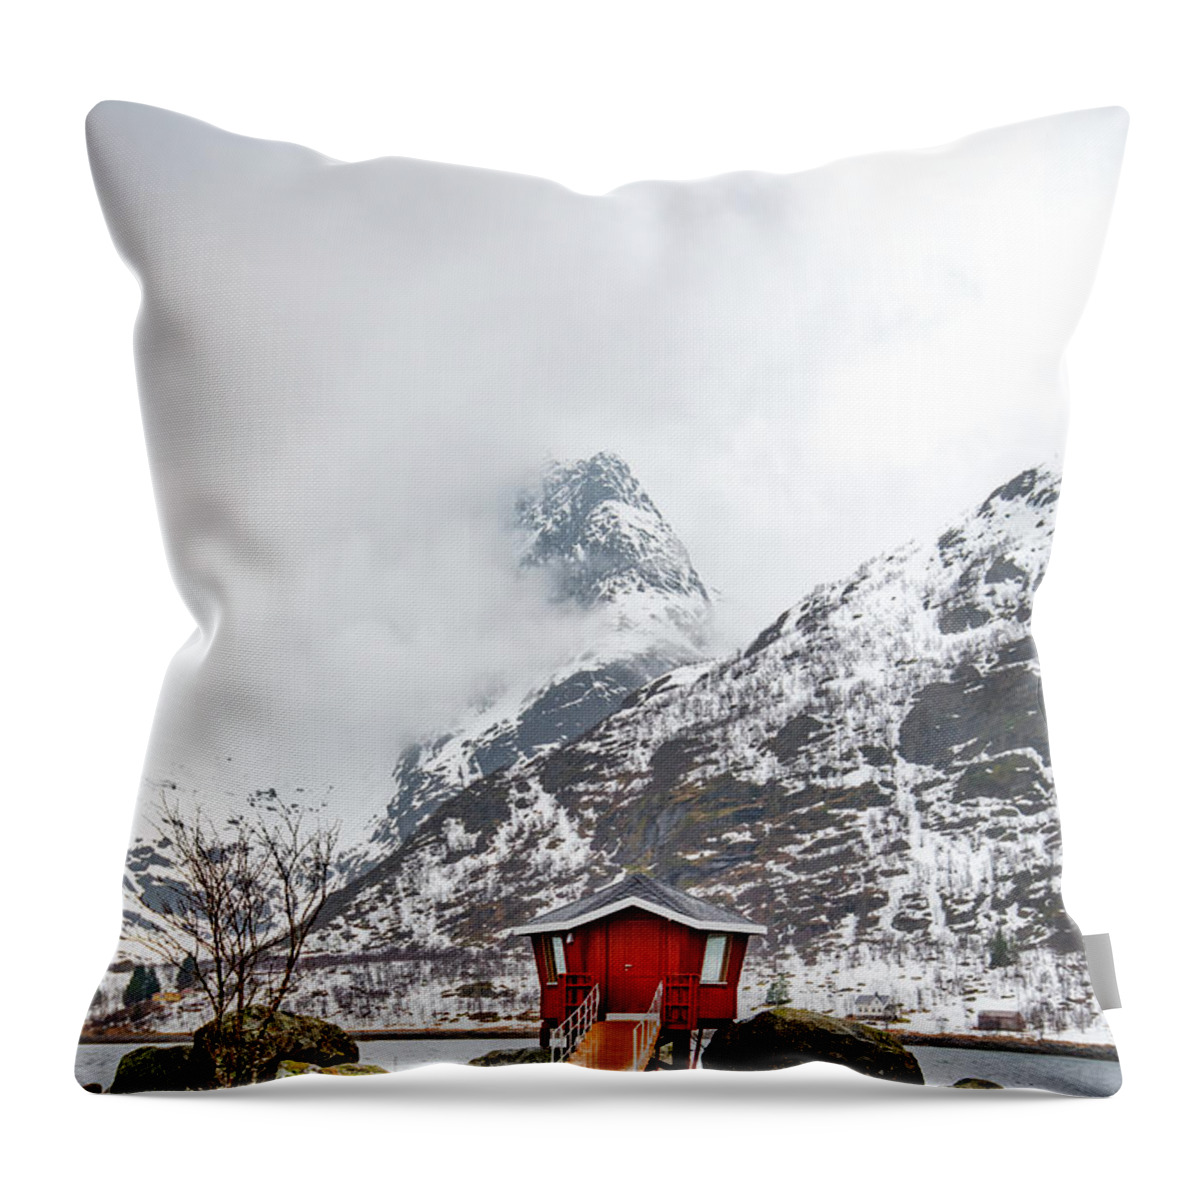 #norway #lofoten #landscape #nature #cabin #mountain #outdoor #snow Throw Pillow featuring the photograph Red Hot Spot by Philippe Sainte-Laudy